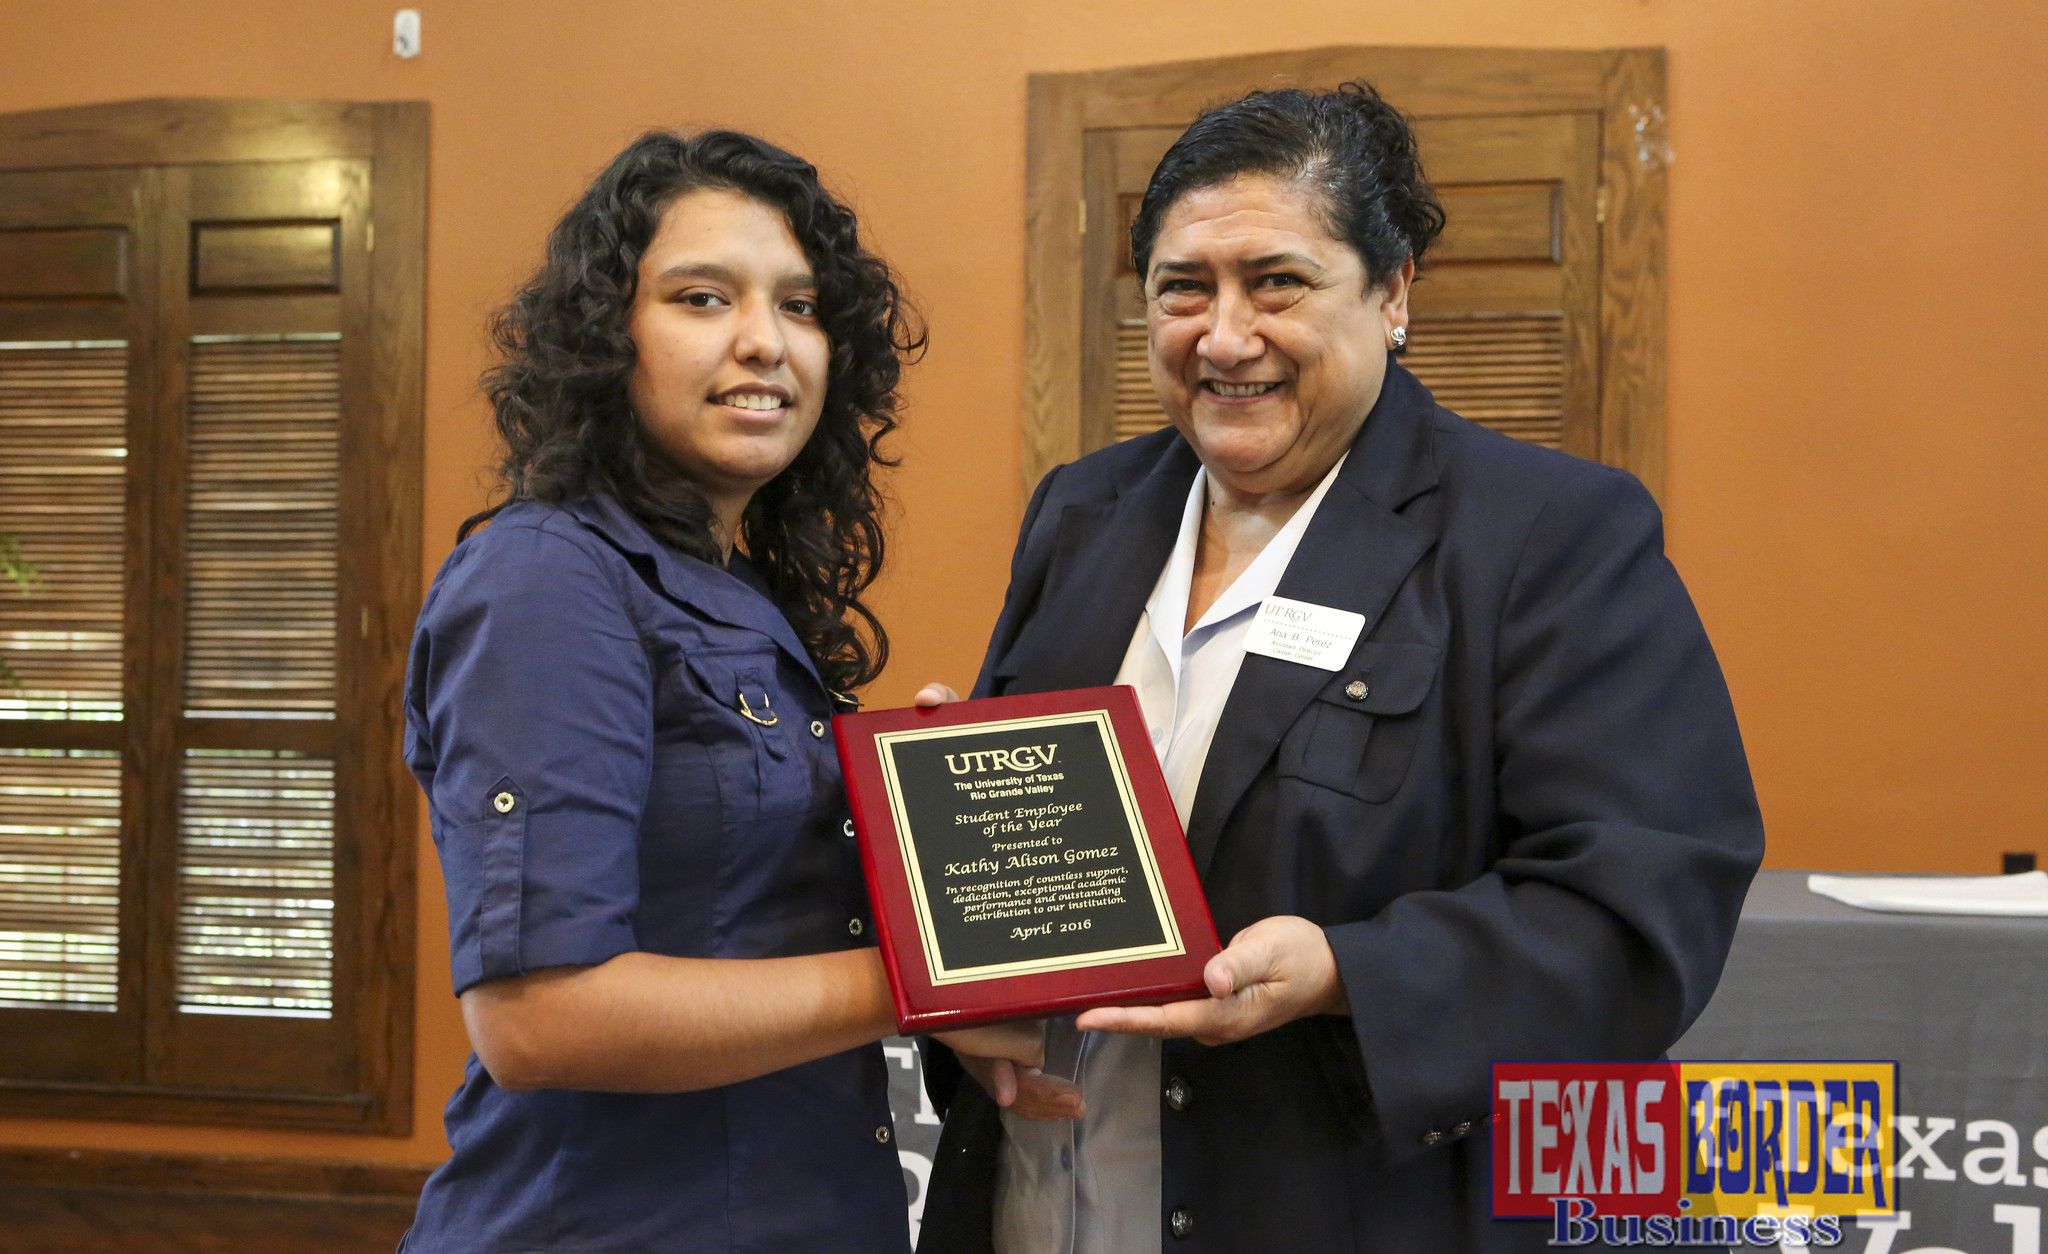 Andrea M. Benton, vice president of Marketing and Communications at the Brownsville Chamber of Commerce, was named the UTRGV 2016 Success Profile of the Year, an award that honors a former student employee who has excelled in their field since their time as a student employee. She is shown here during an appreciation luncheon on Friday, April 15, 2016, with Ana Perez, assistant director for Student Employment at UTRGV. (UTRGV Photo by Veronica Gaona)